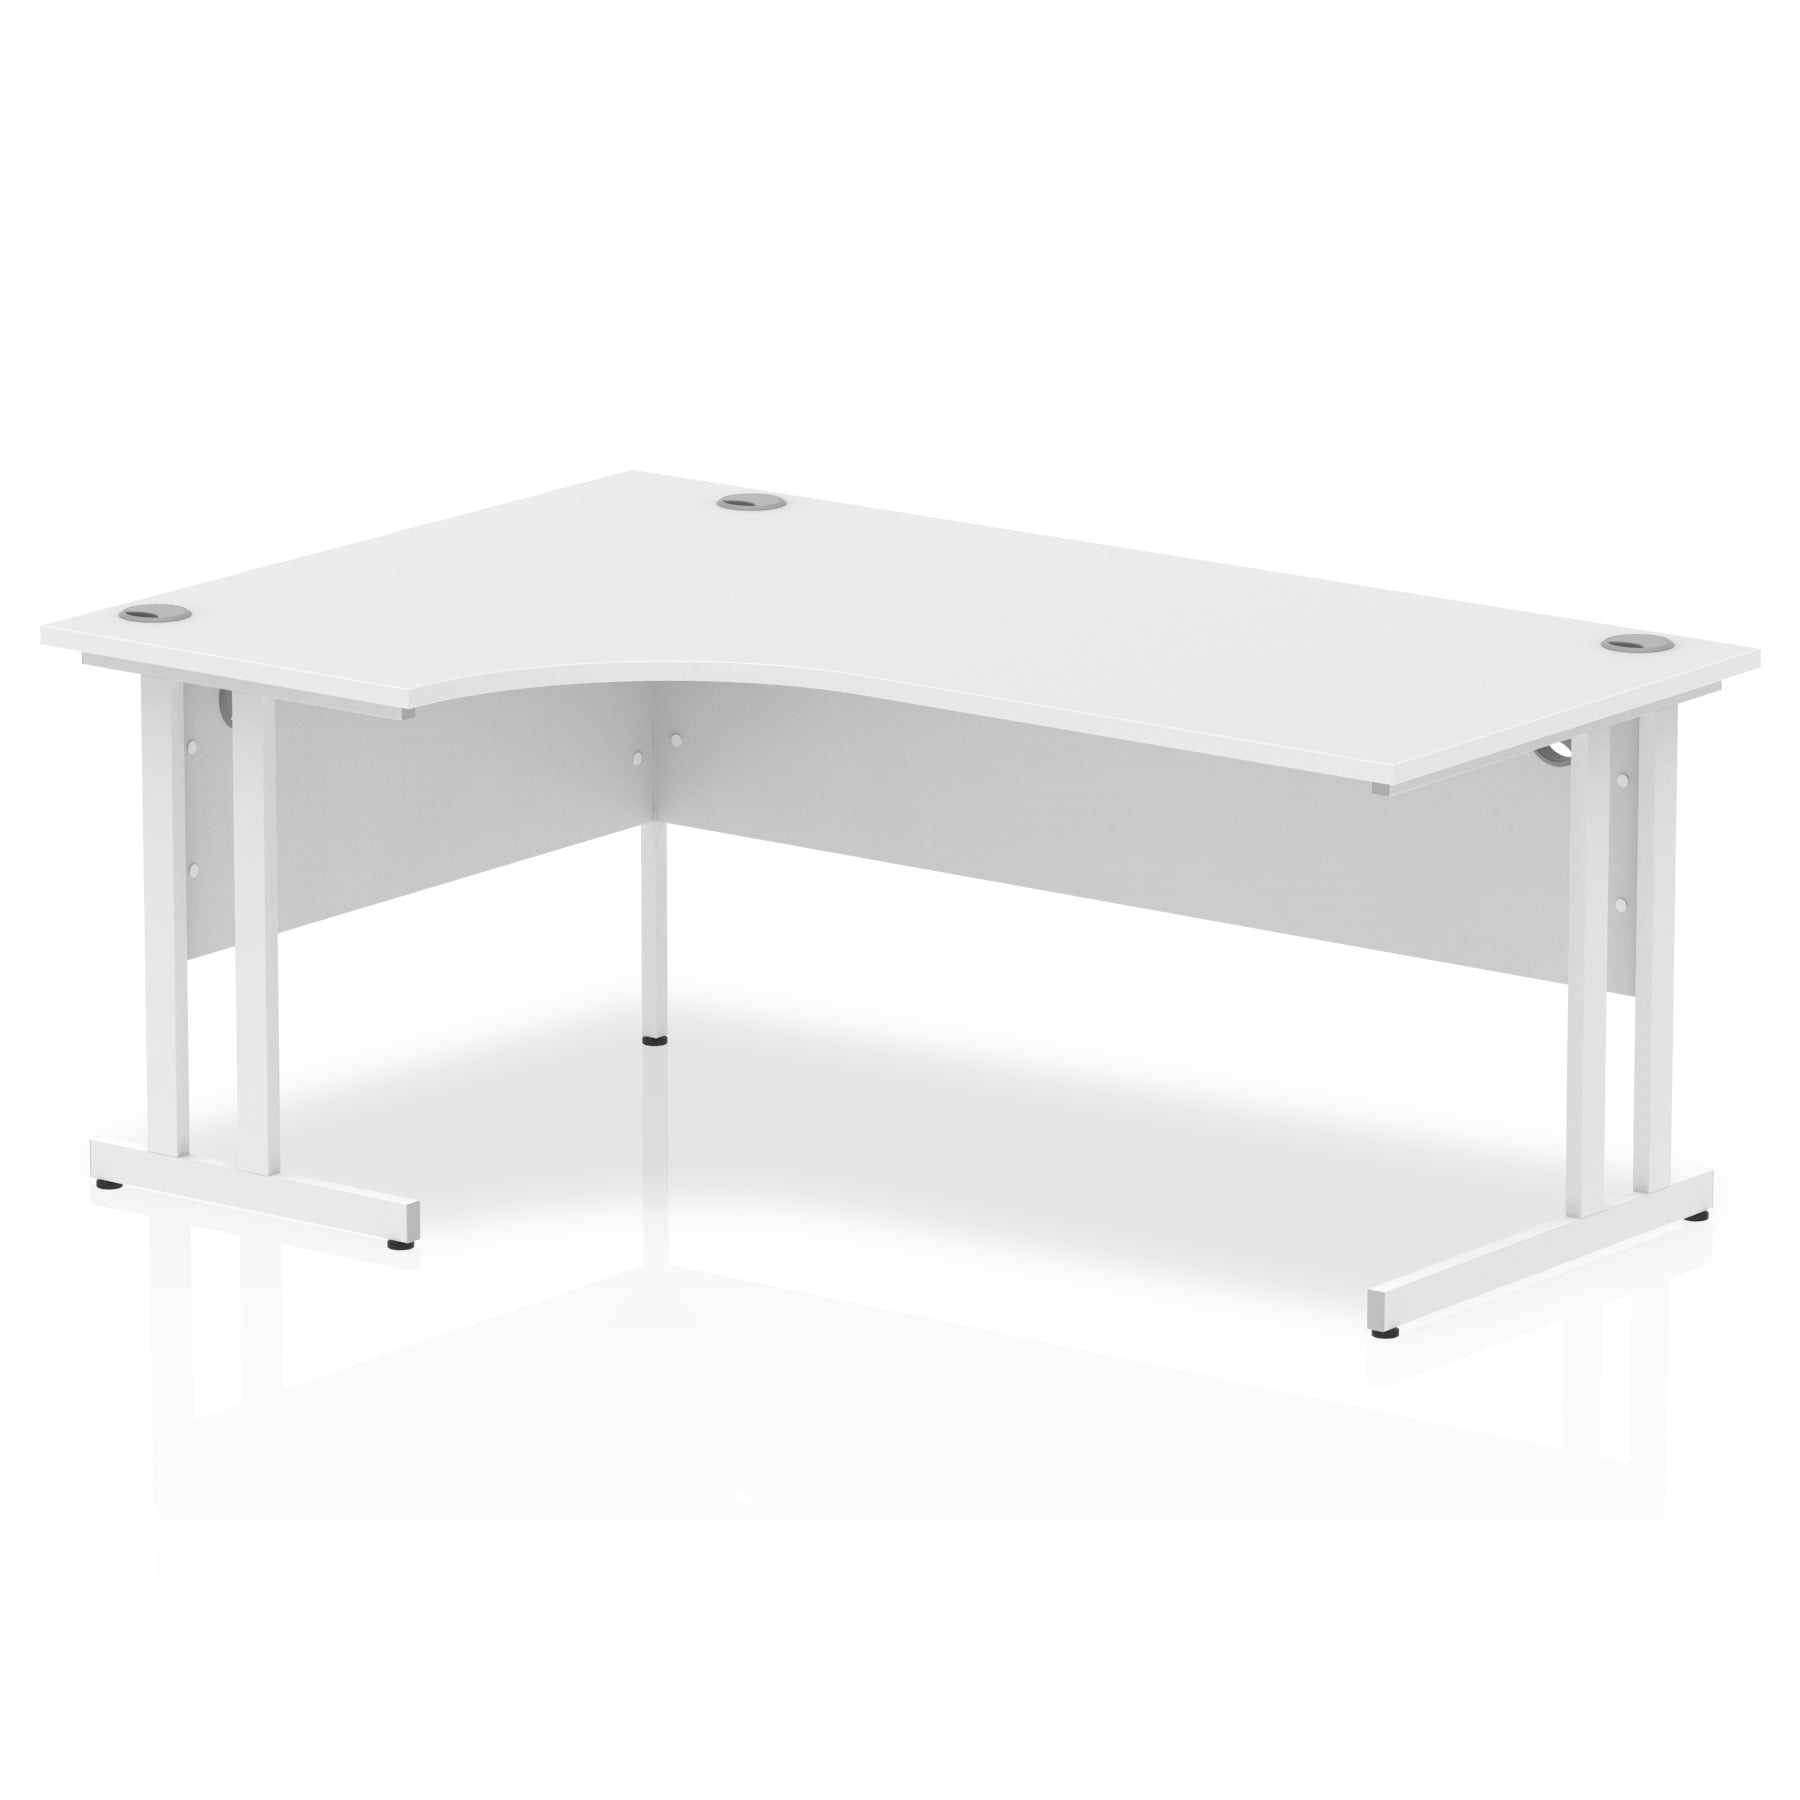 Impulse 1800mm Left Crescent Desk Cantilever Leg - 5-Year Guarantee, Self-Assembly, MFC Material, 1800x1200 Top, Silver/White/Black Frame